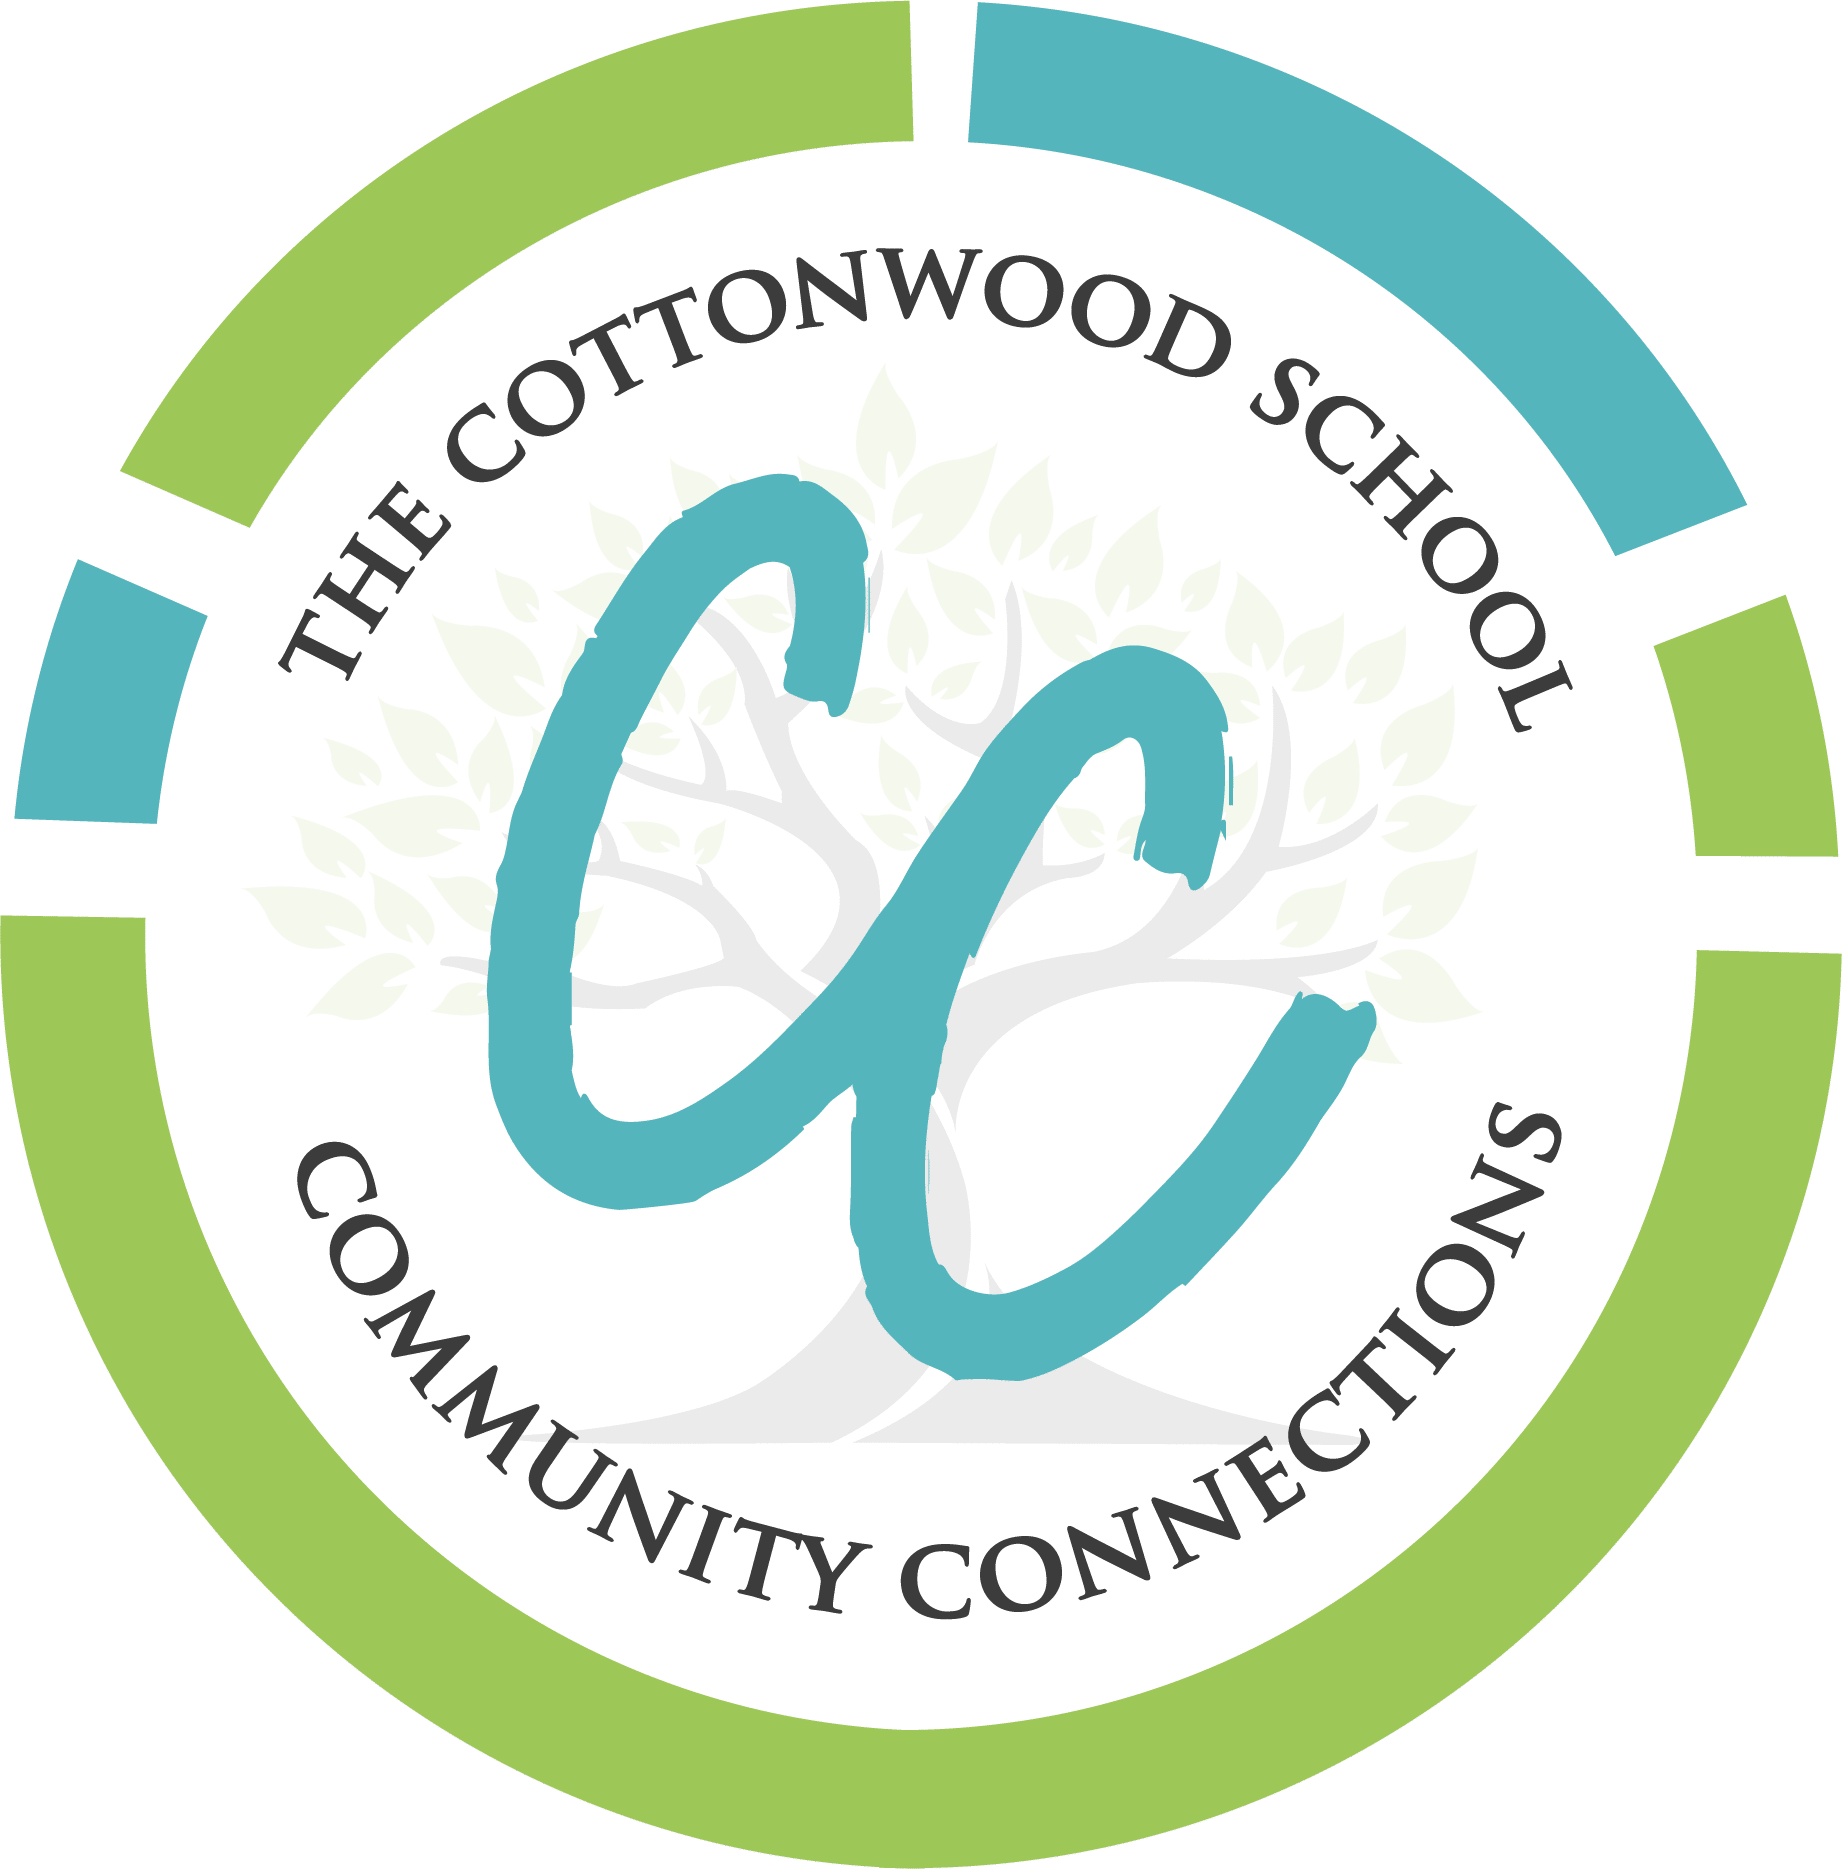 Community Connections logo